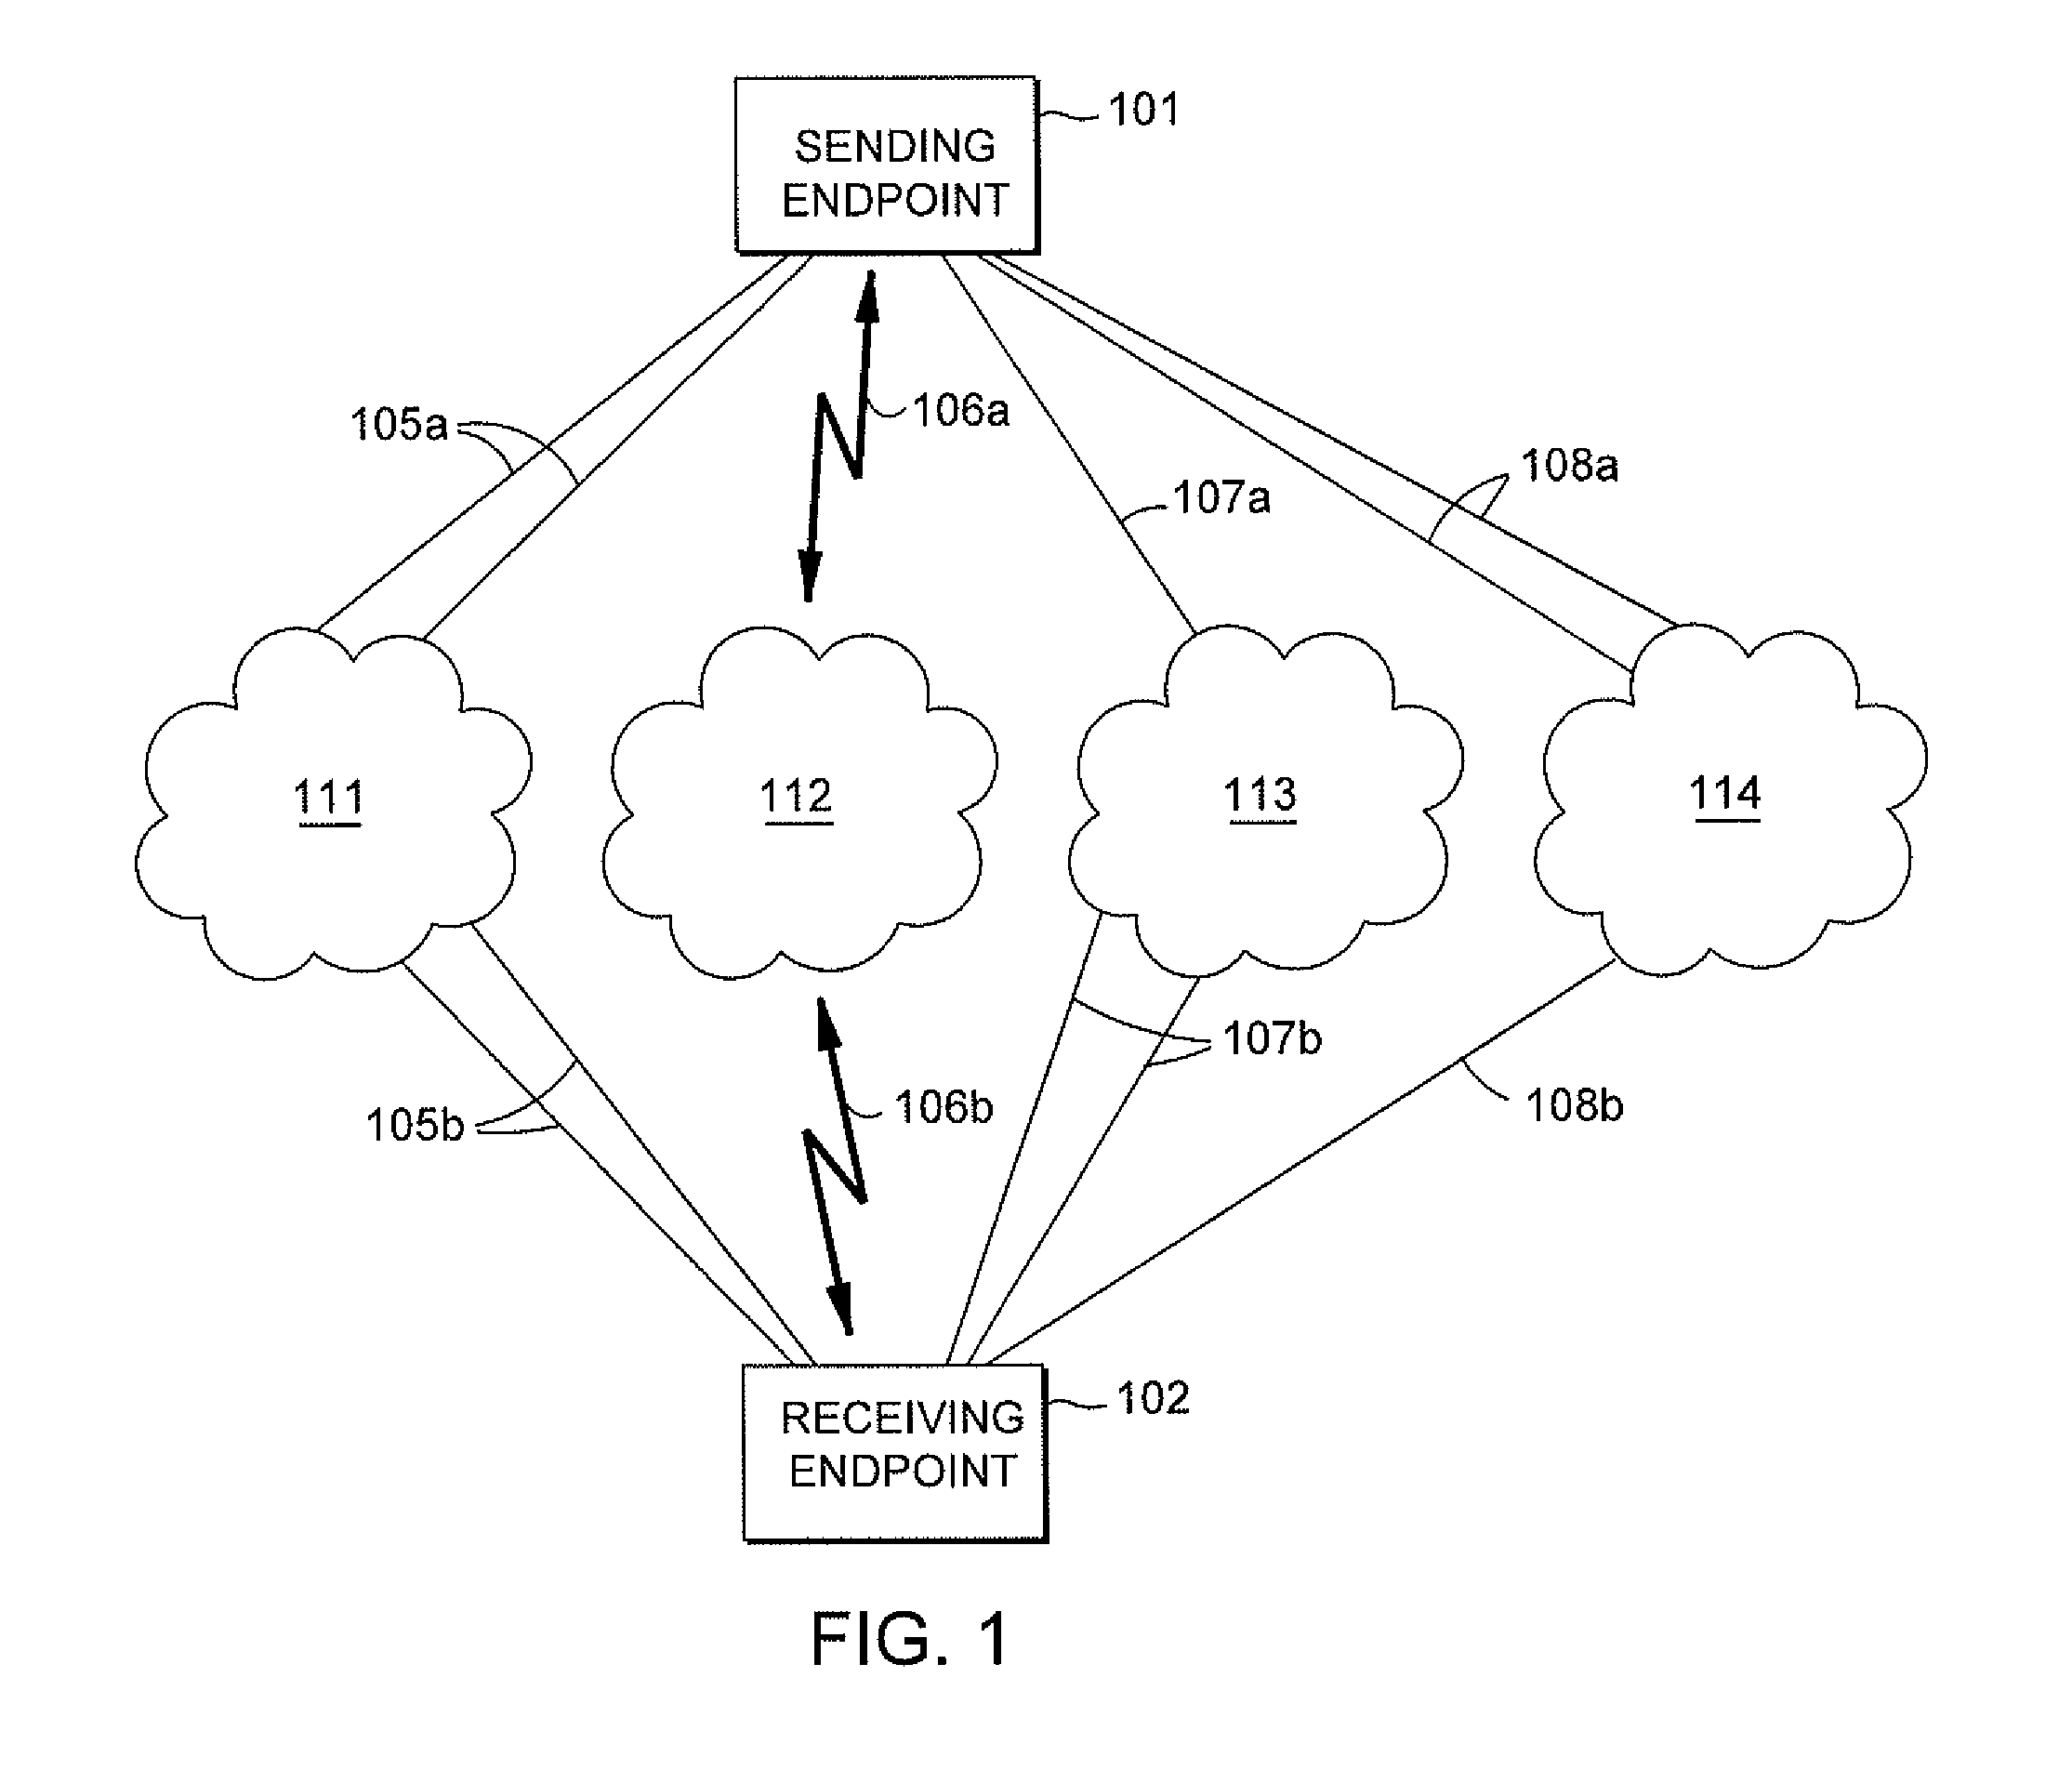 Network streaming of a video stream over multiple communication channels